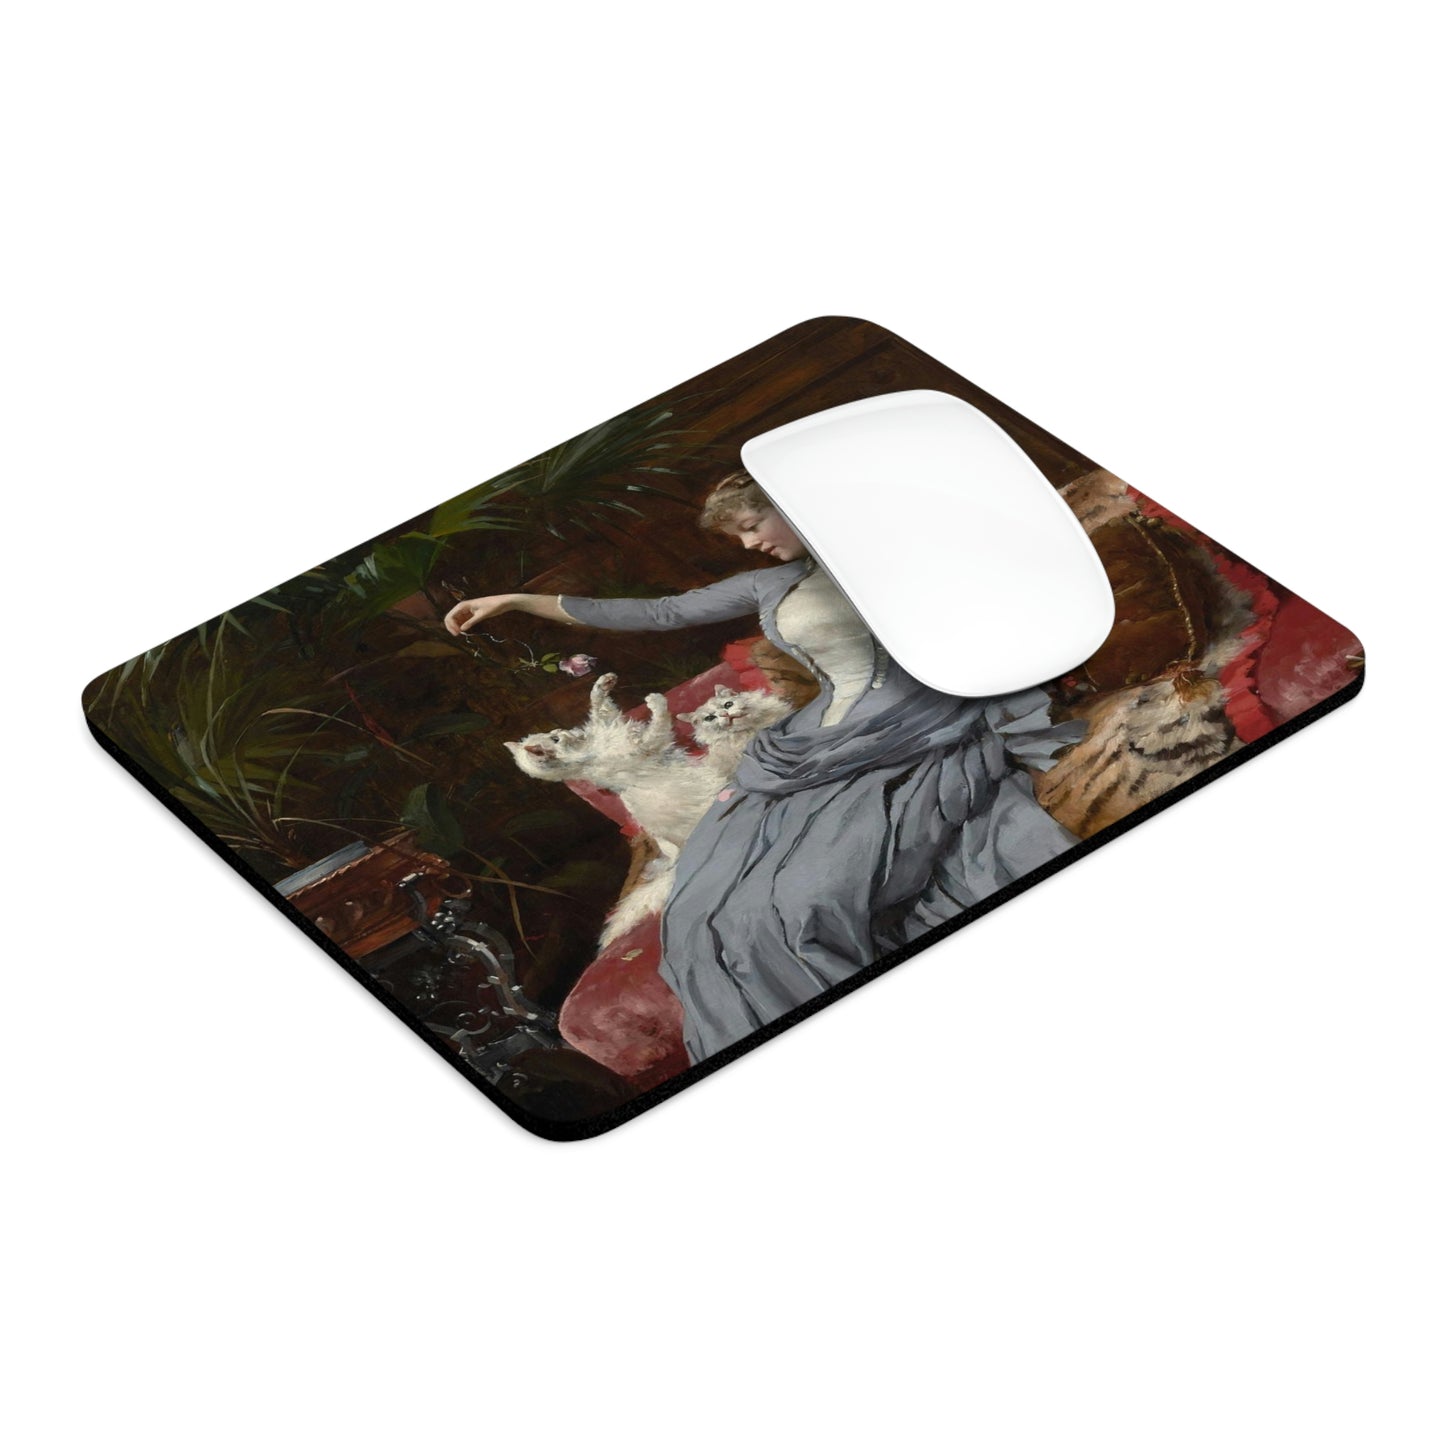 Geza Vastagh: "Playtime" – Mouse Pad